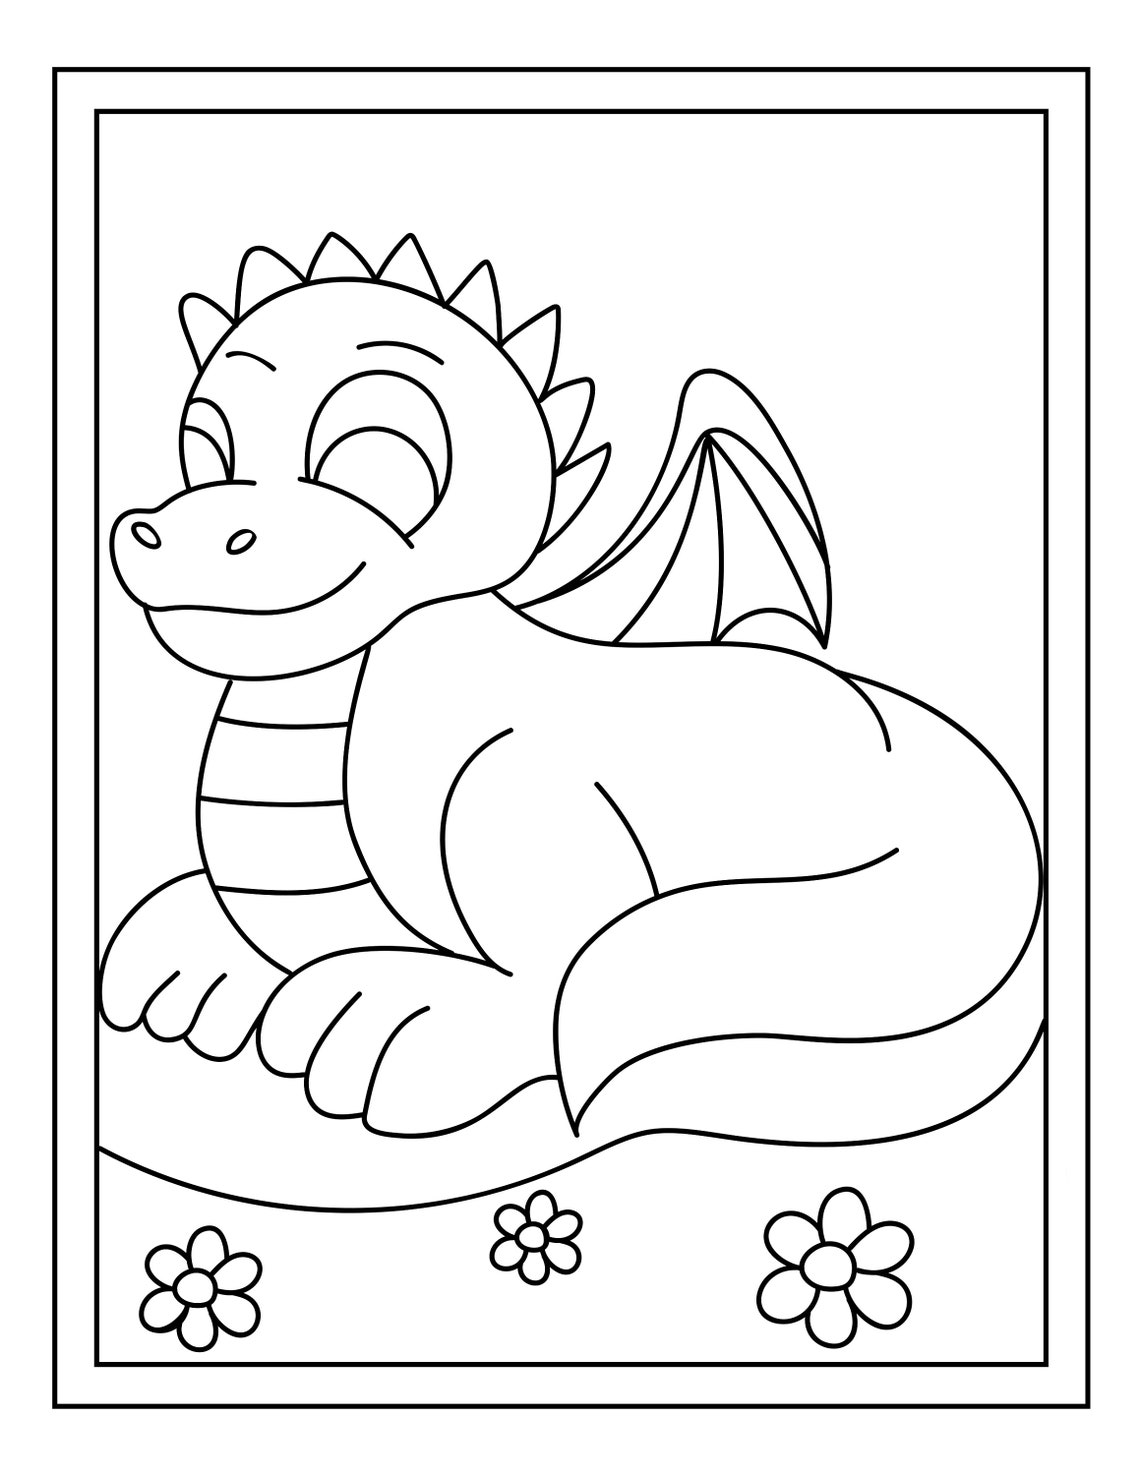 Cute Dragon Coloring Pages for Kids Cute Printable Coloring - Etsy UK